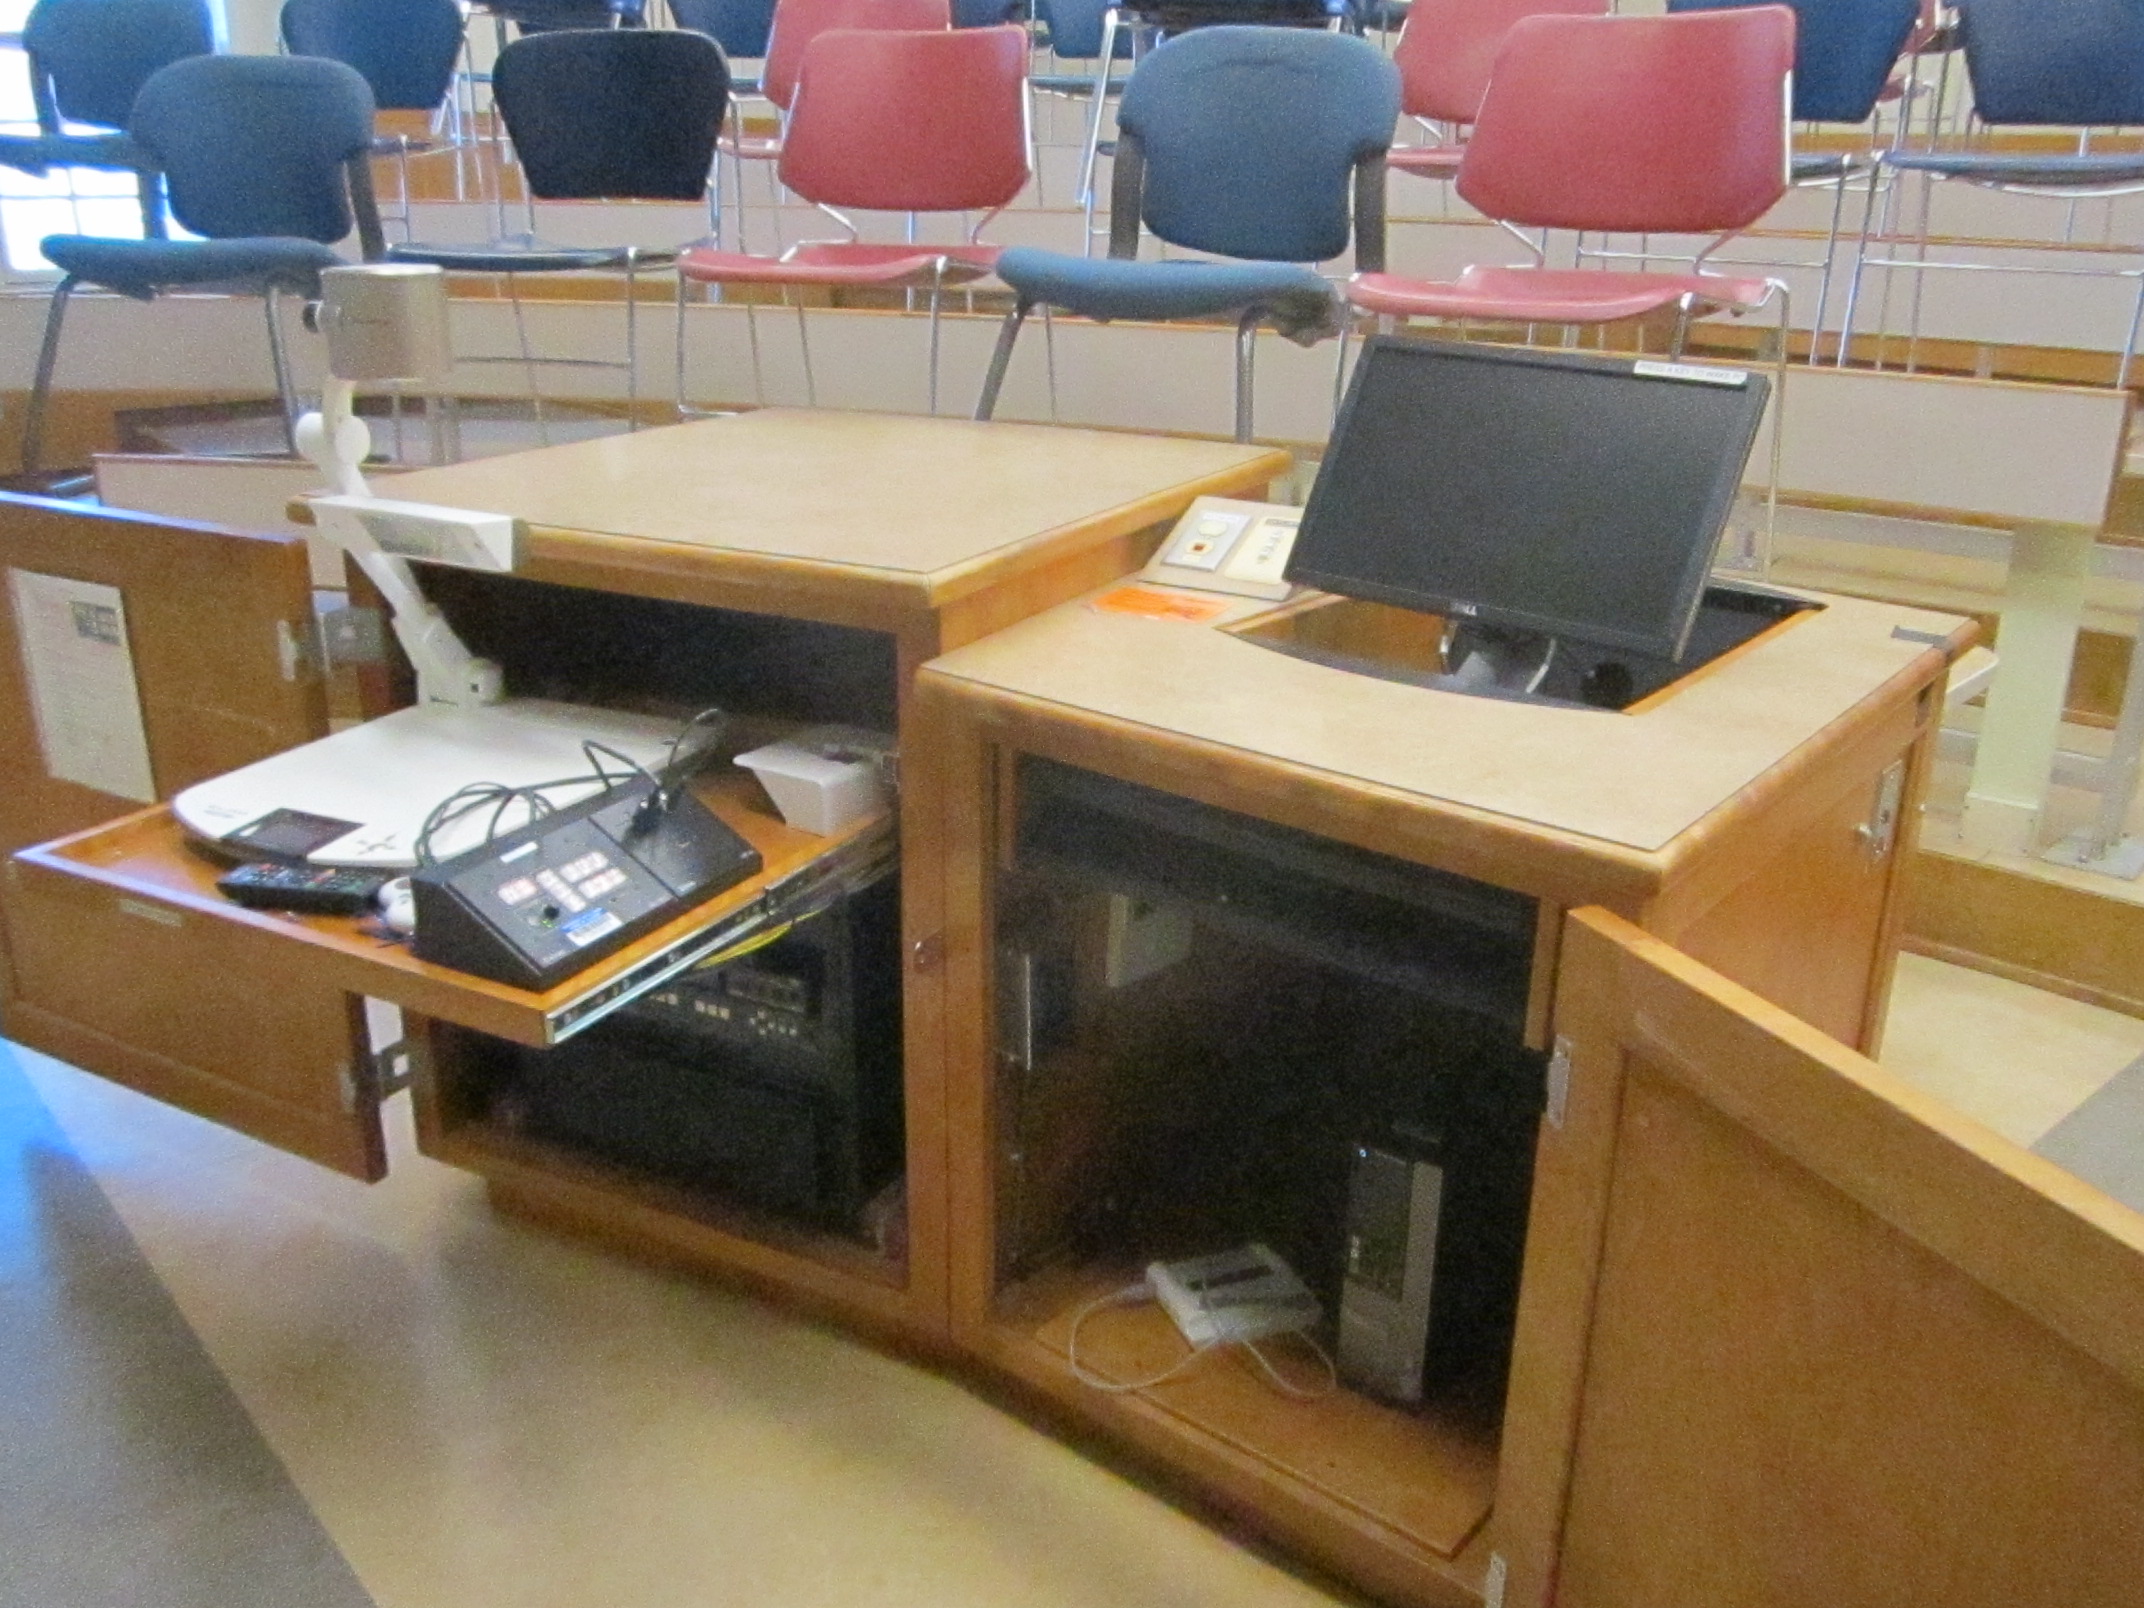 A view of the open cabinet with a computer monitor, VGA and HDMI inputs, document camera, a push button controller, audio visual rack, and electric screen controls.